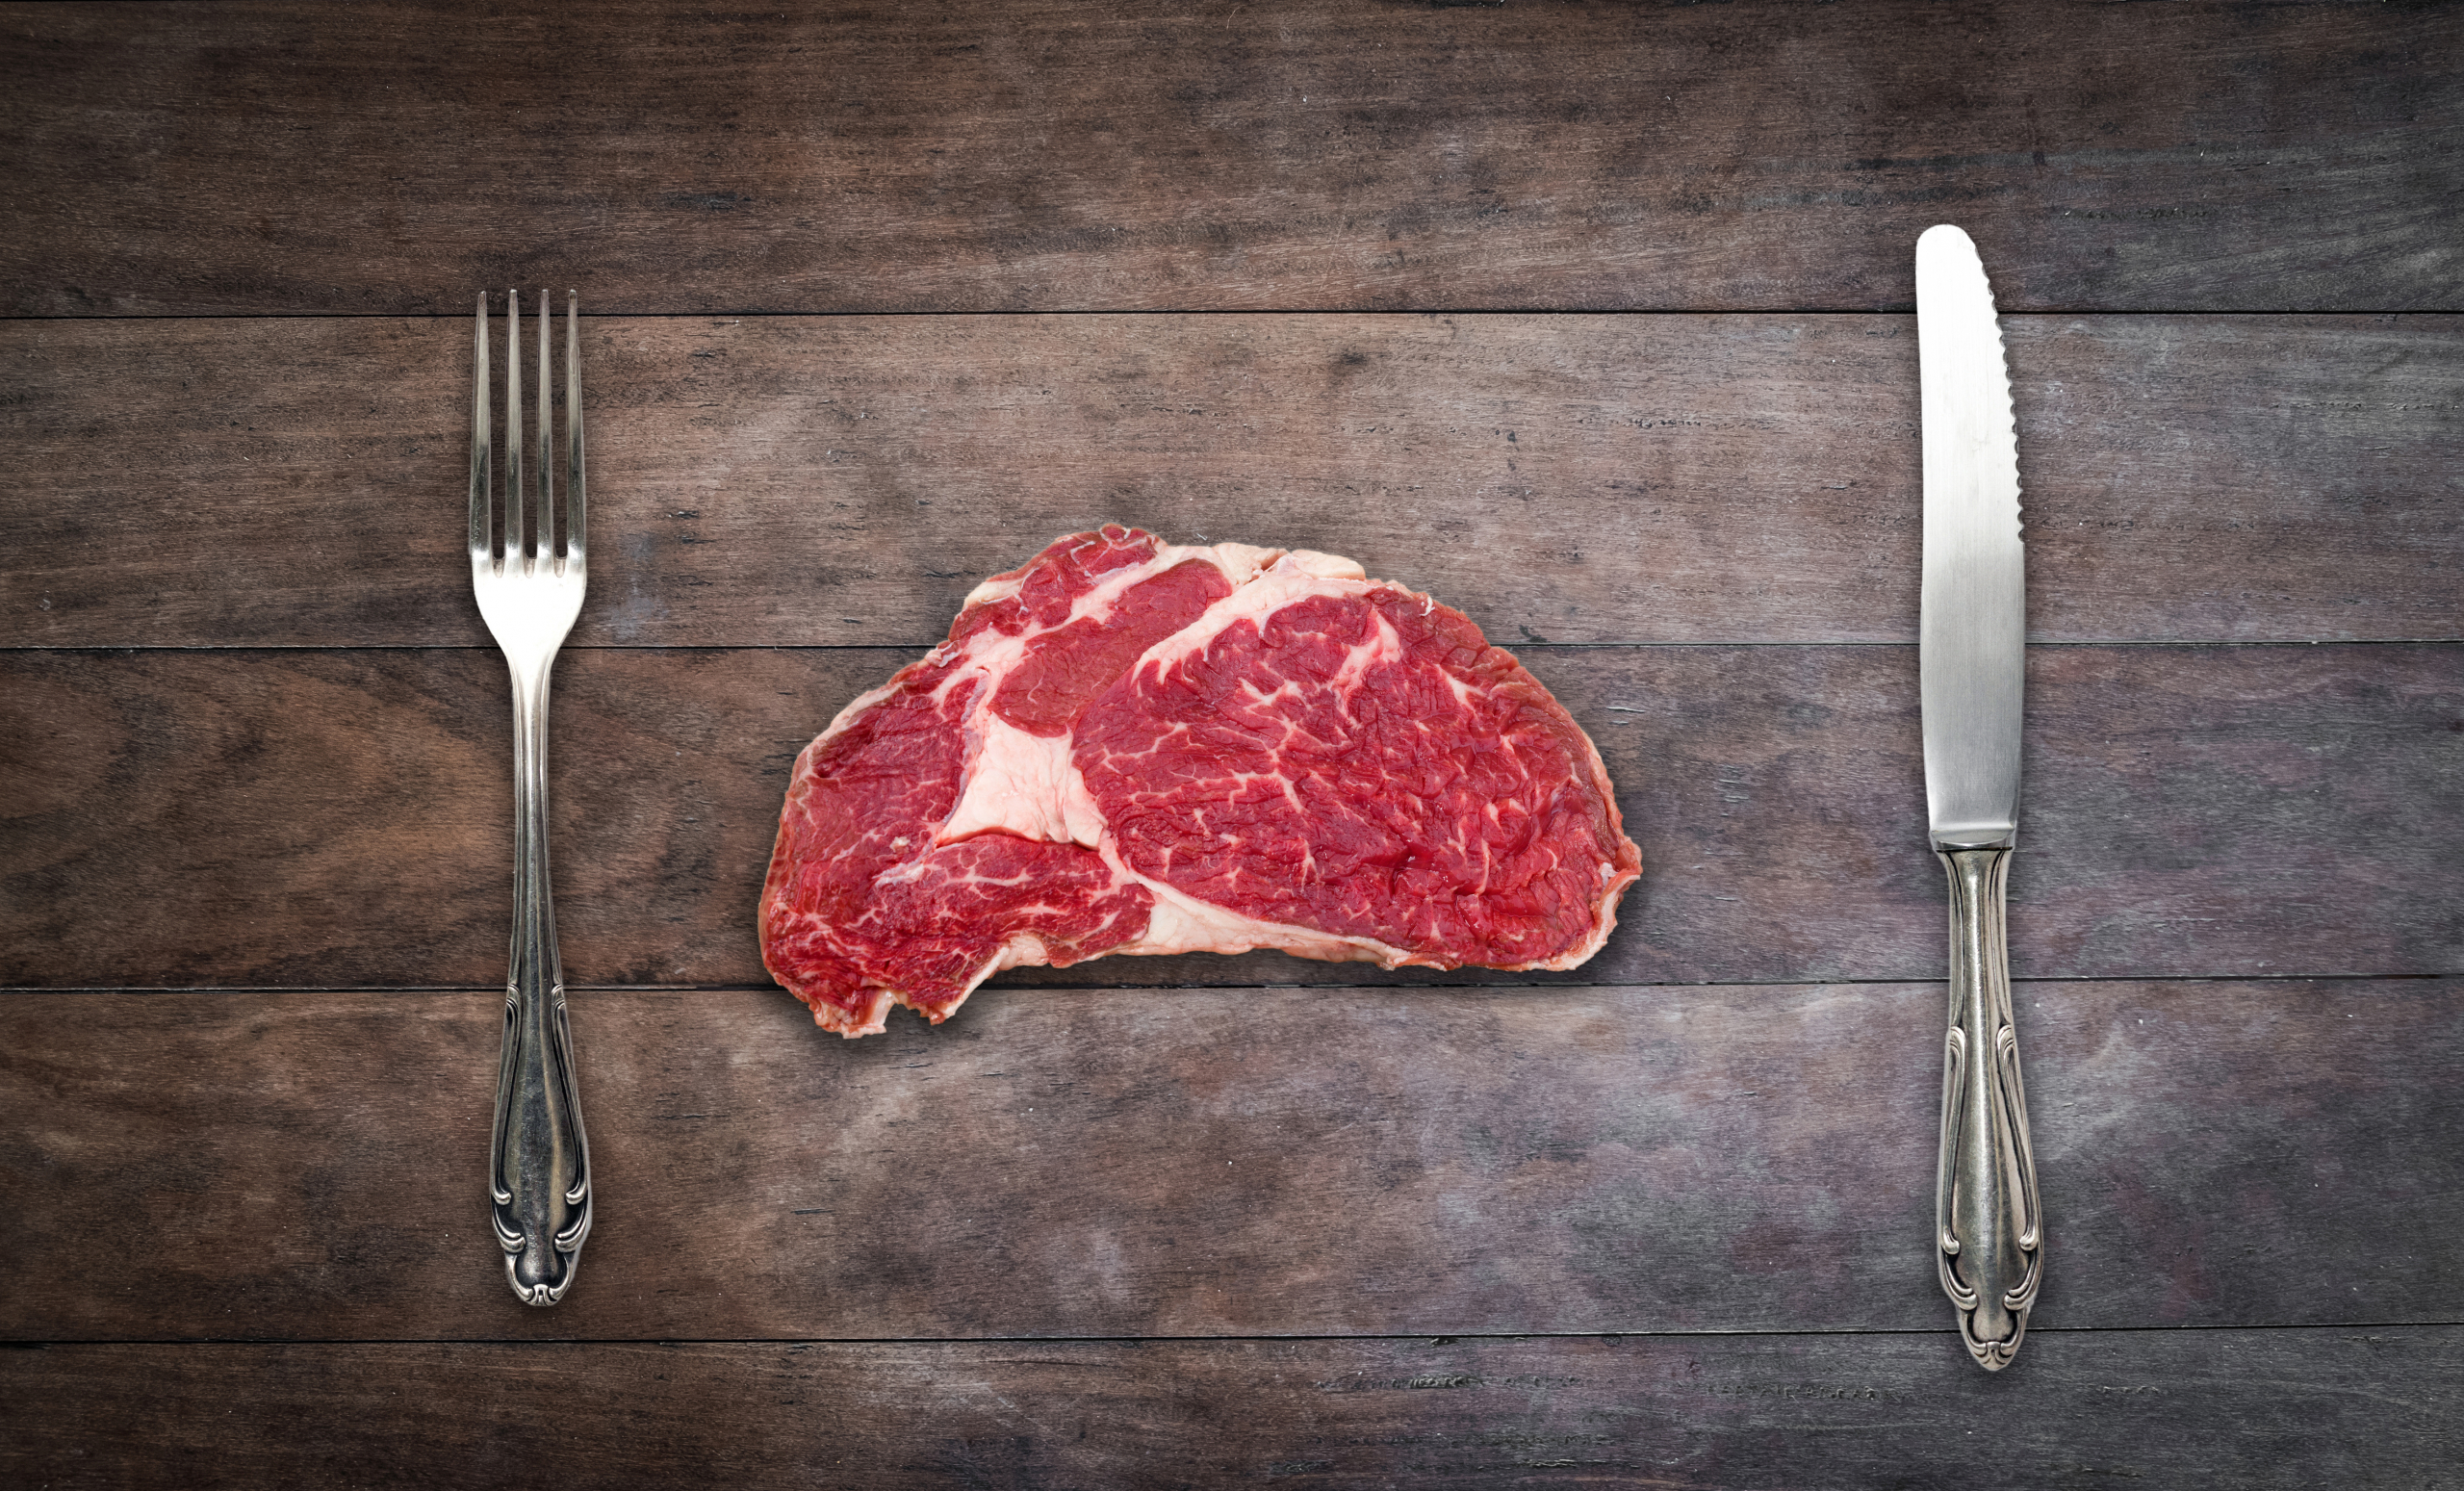 Experts React To The New ‘Lion Diet’ Where People Only Eat Meat And Salt For 30 Days